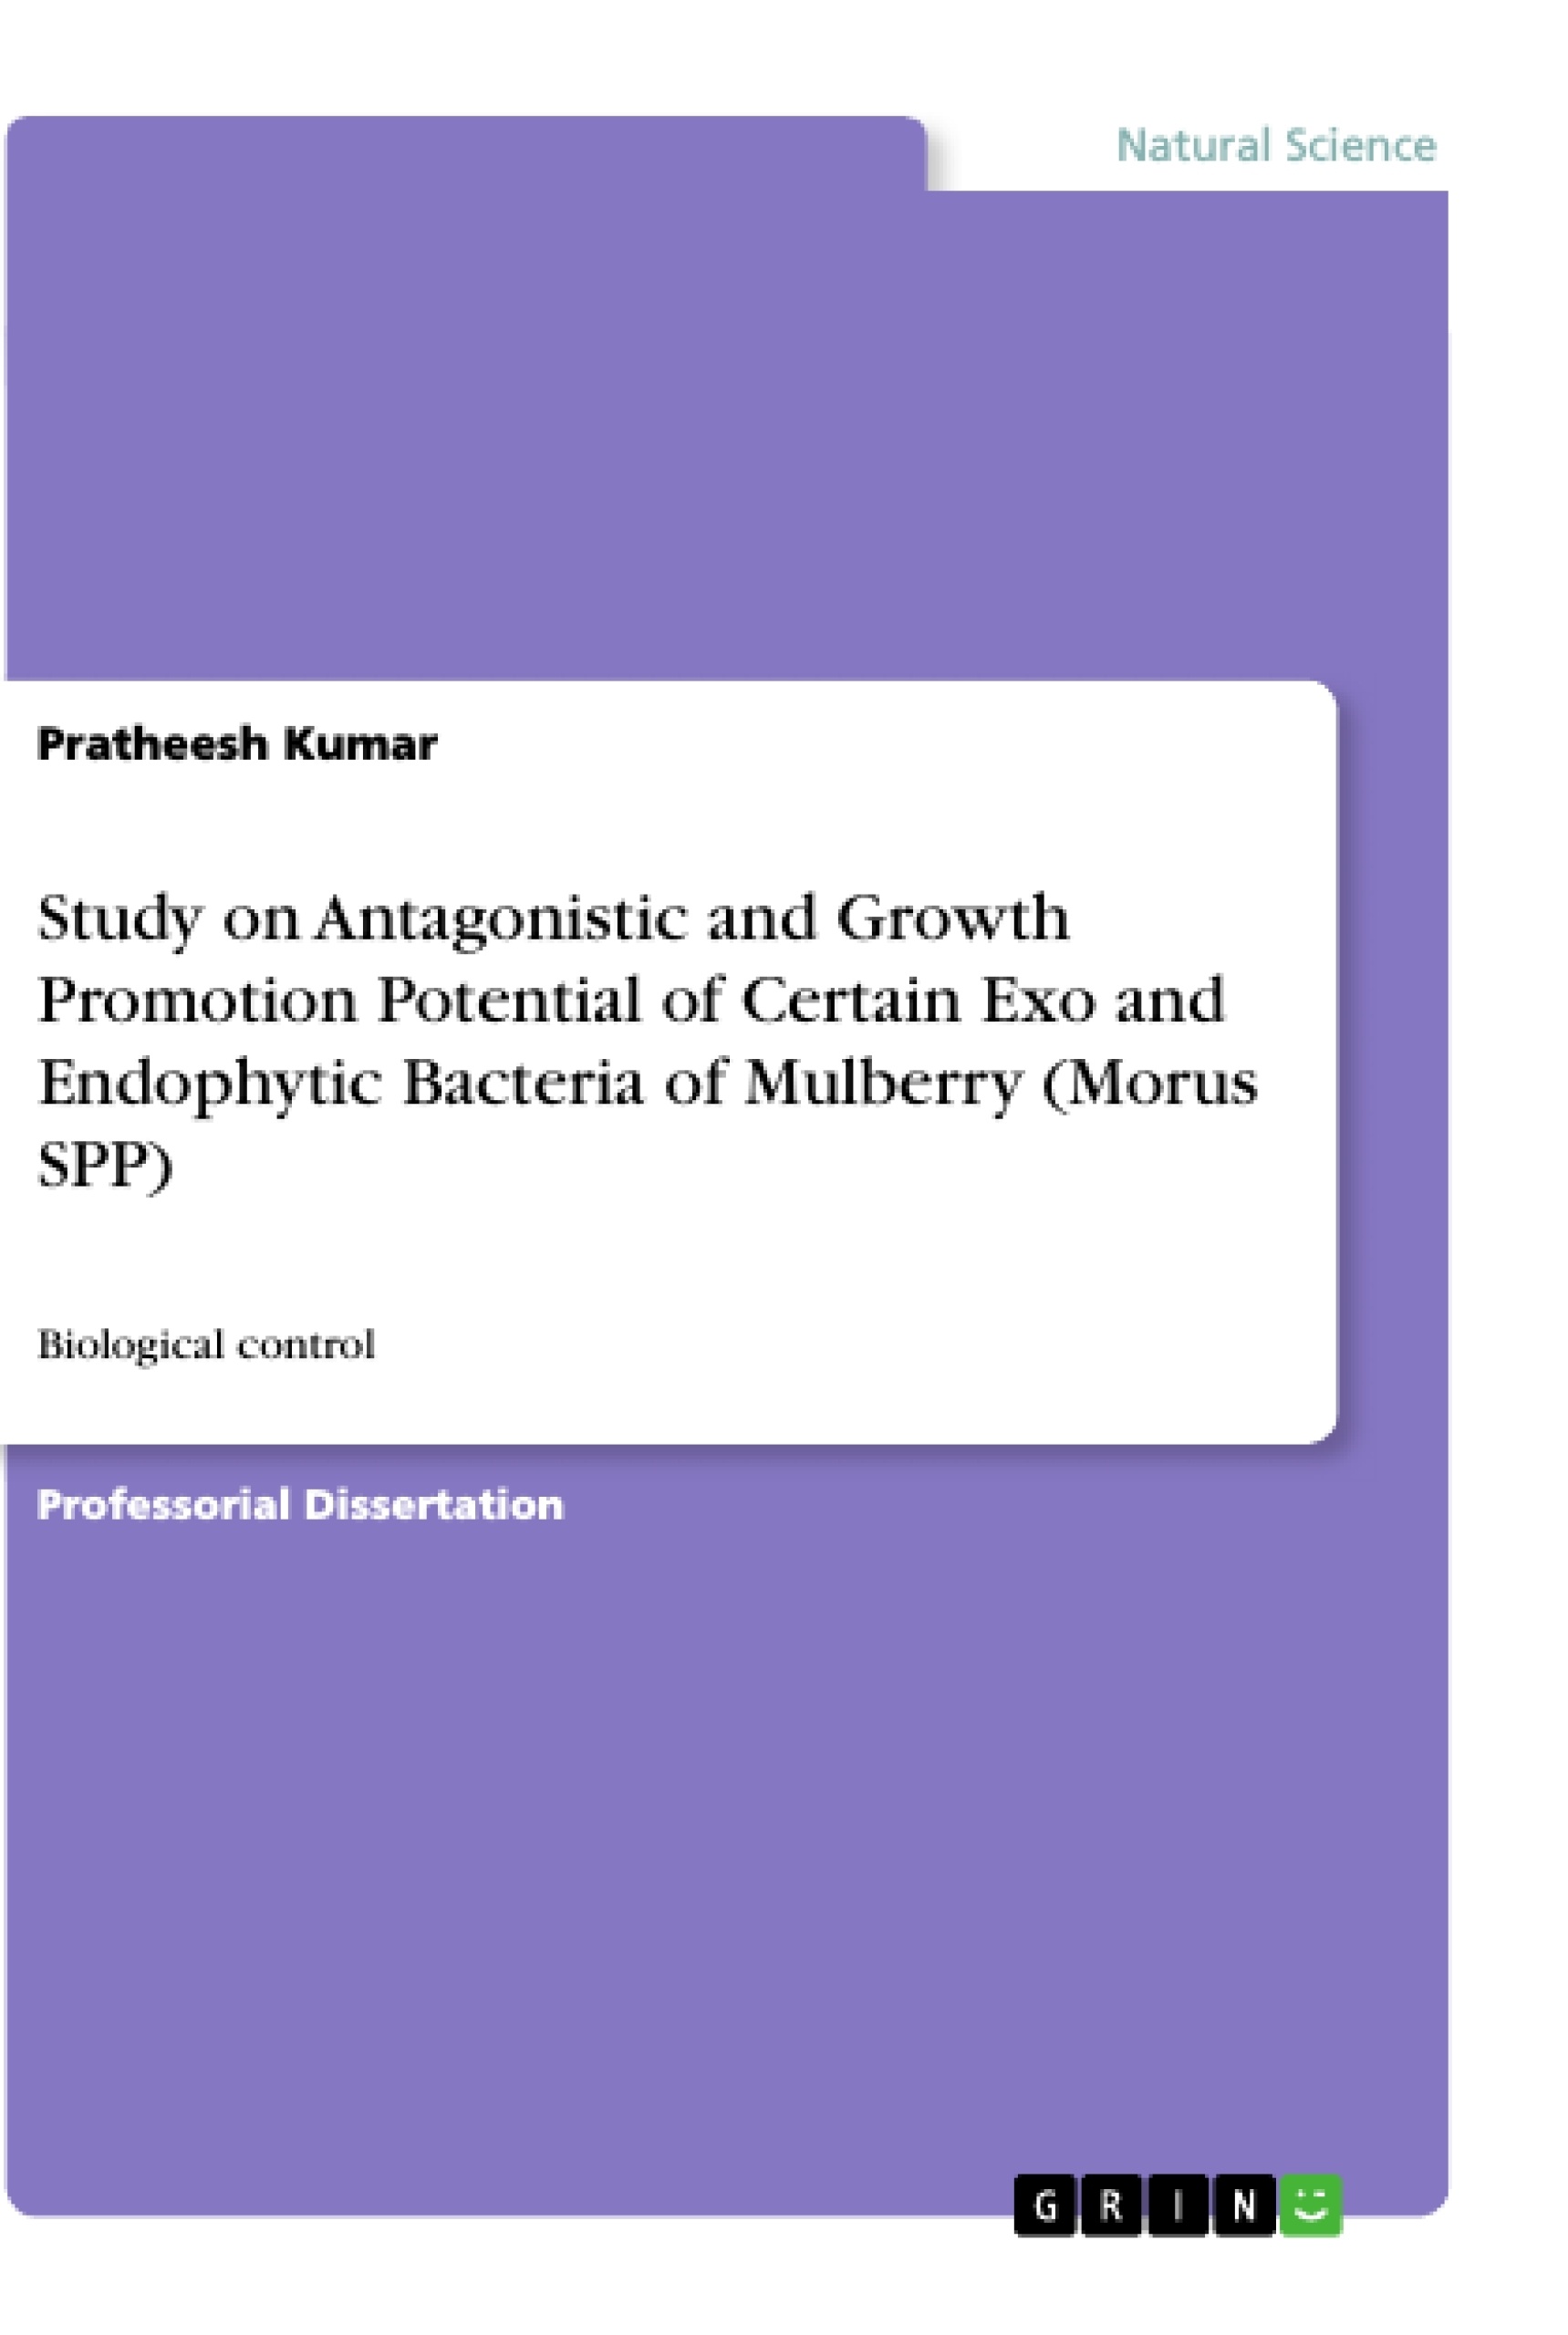 Title: Study on Antagonistic and Growth Promotion Potential of Certain Exo and Endophytic Bacteria of Mulberry (Morus SPP)